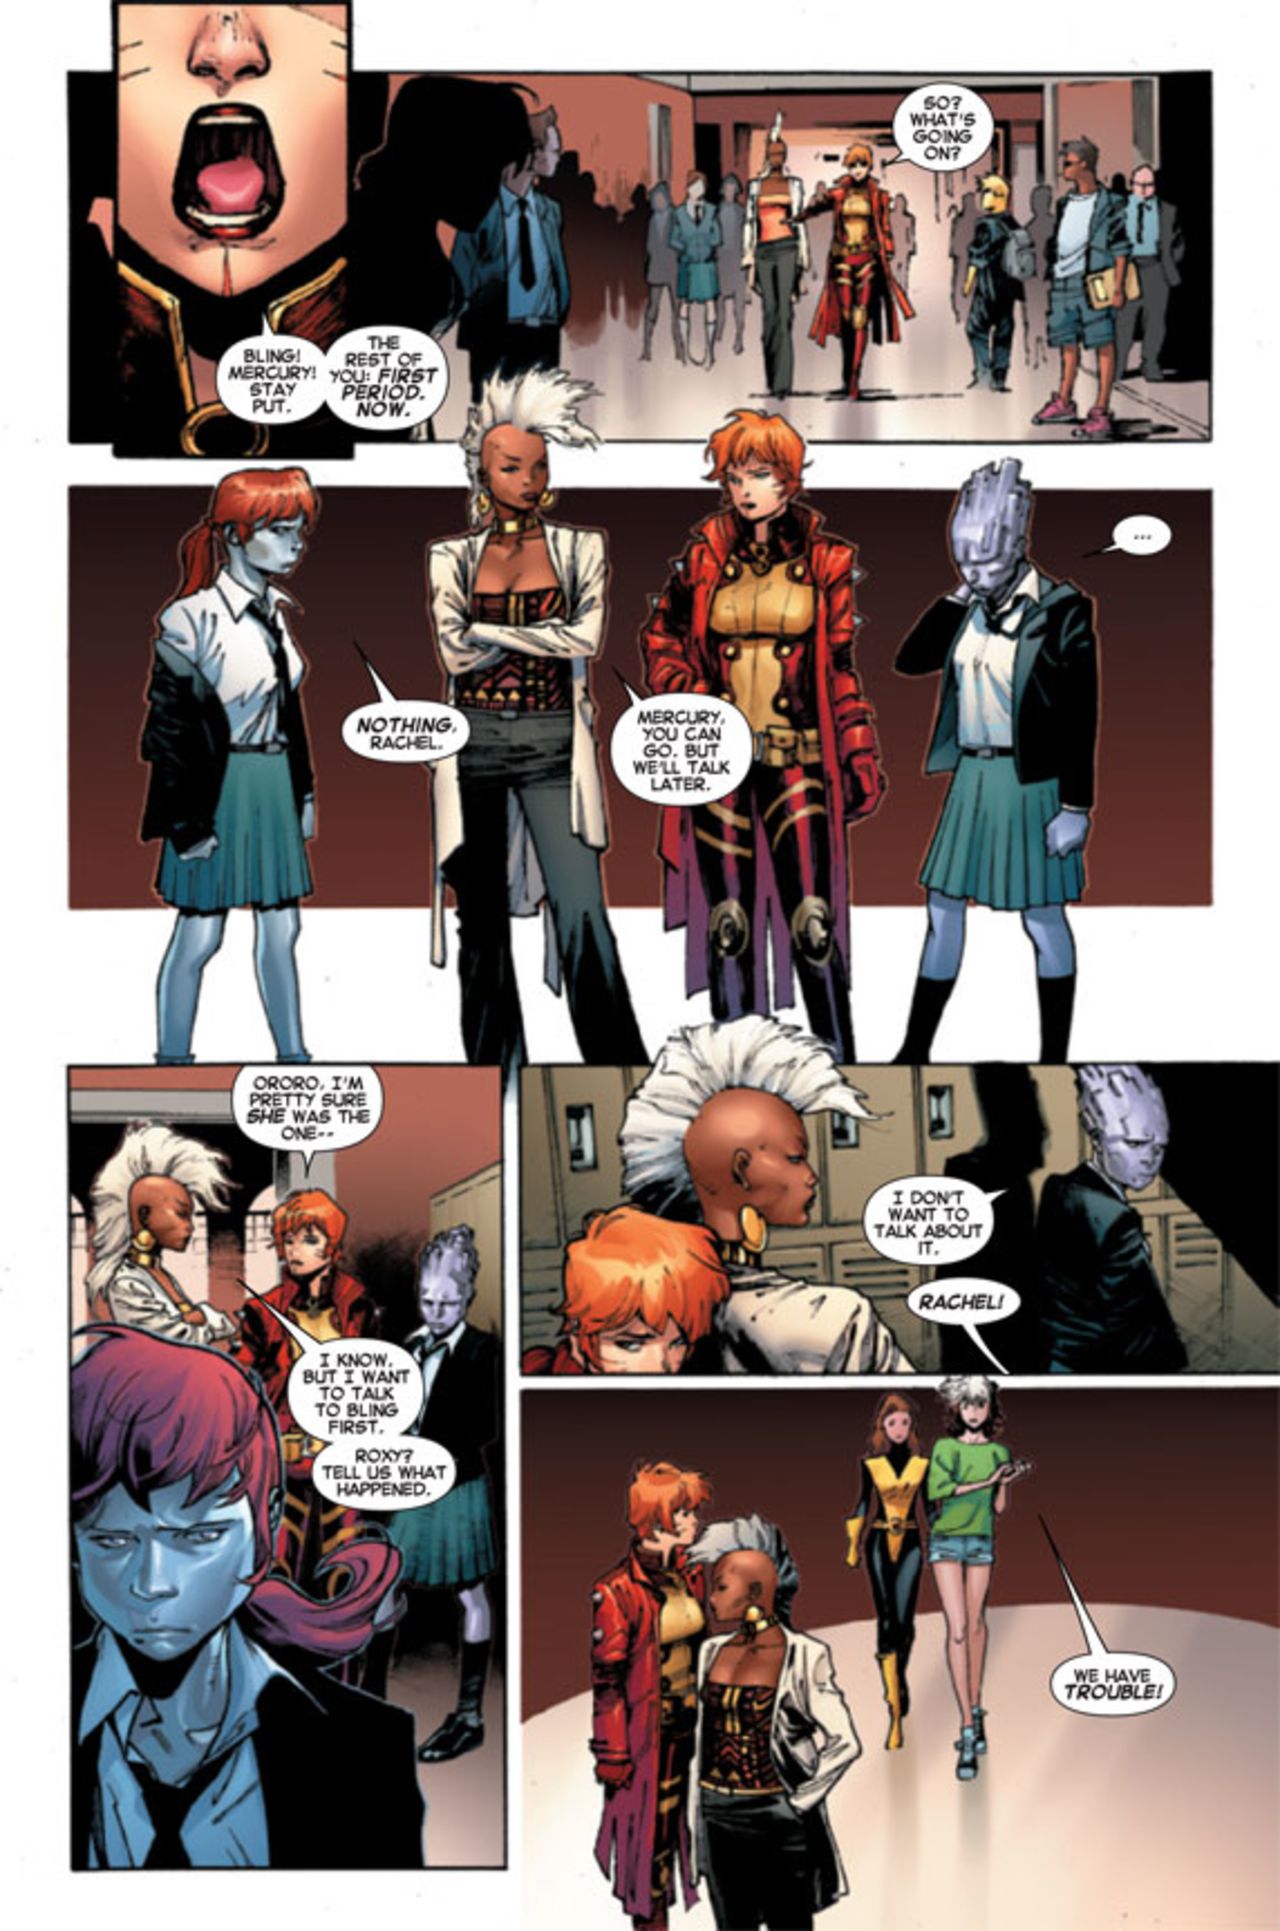 The new team is made up of popular established female characters, a testament to the strong women in "X-Men" history.